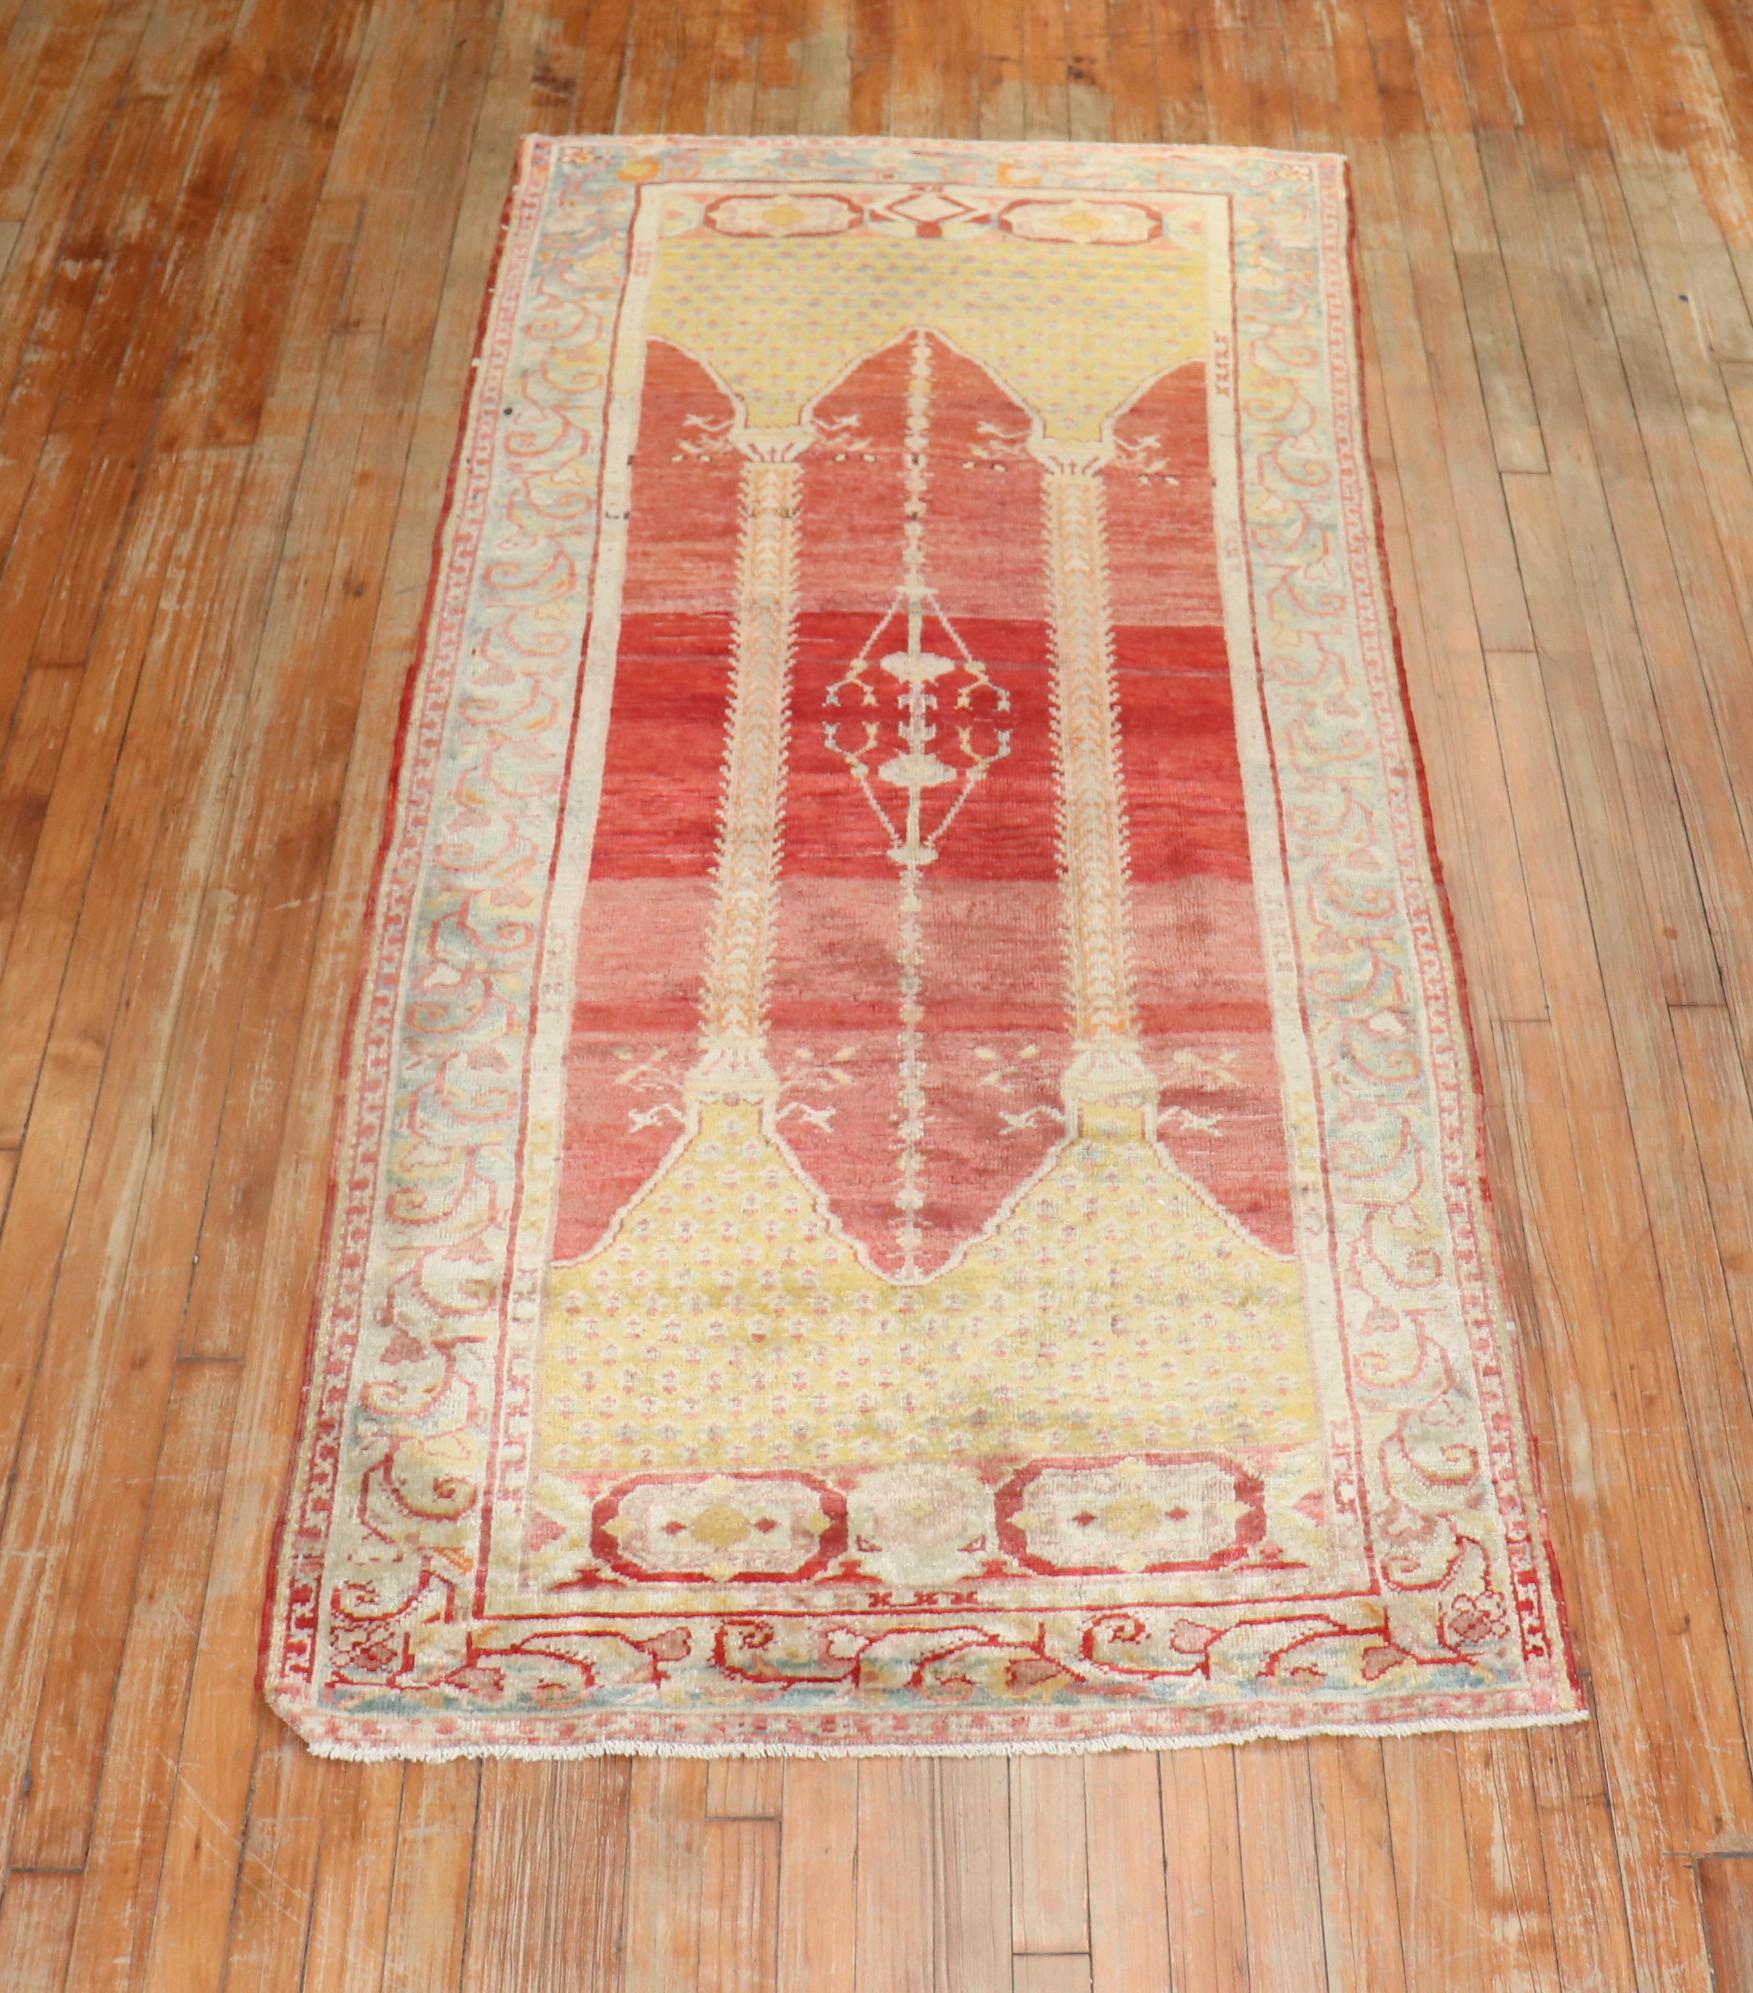 An early 20th century Turkish Sivas runner with a double column scroll motif on an a soft red field.

Measures: 3'5